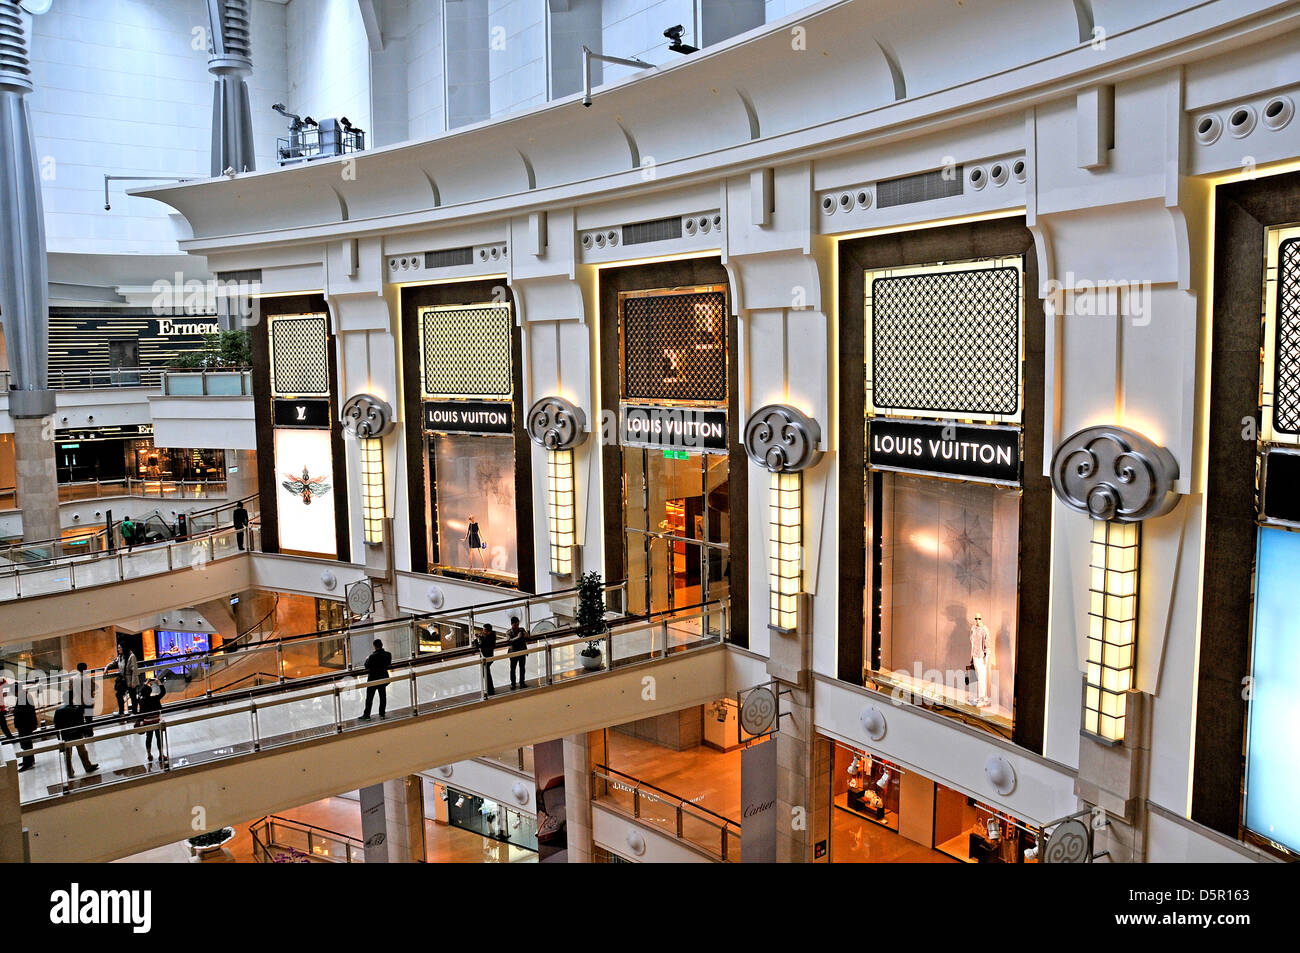 Louis Vuitton boutique in mall of 101 tower Taipei Taiwan Stock Photo, Royalty Free Image ...